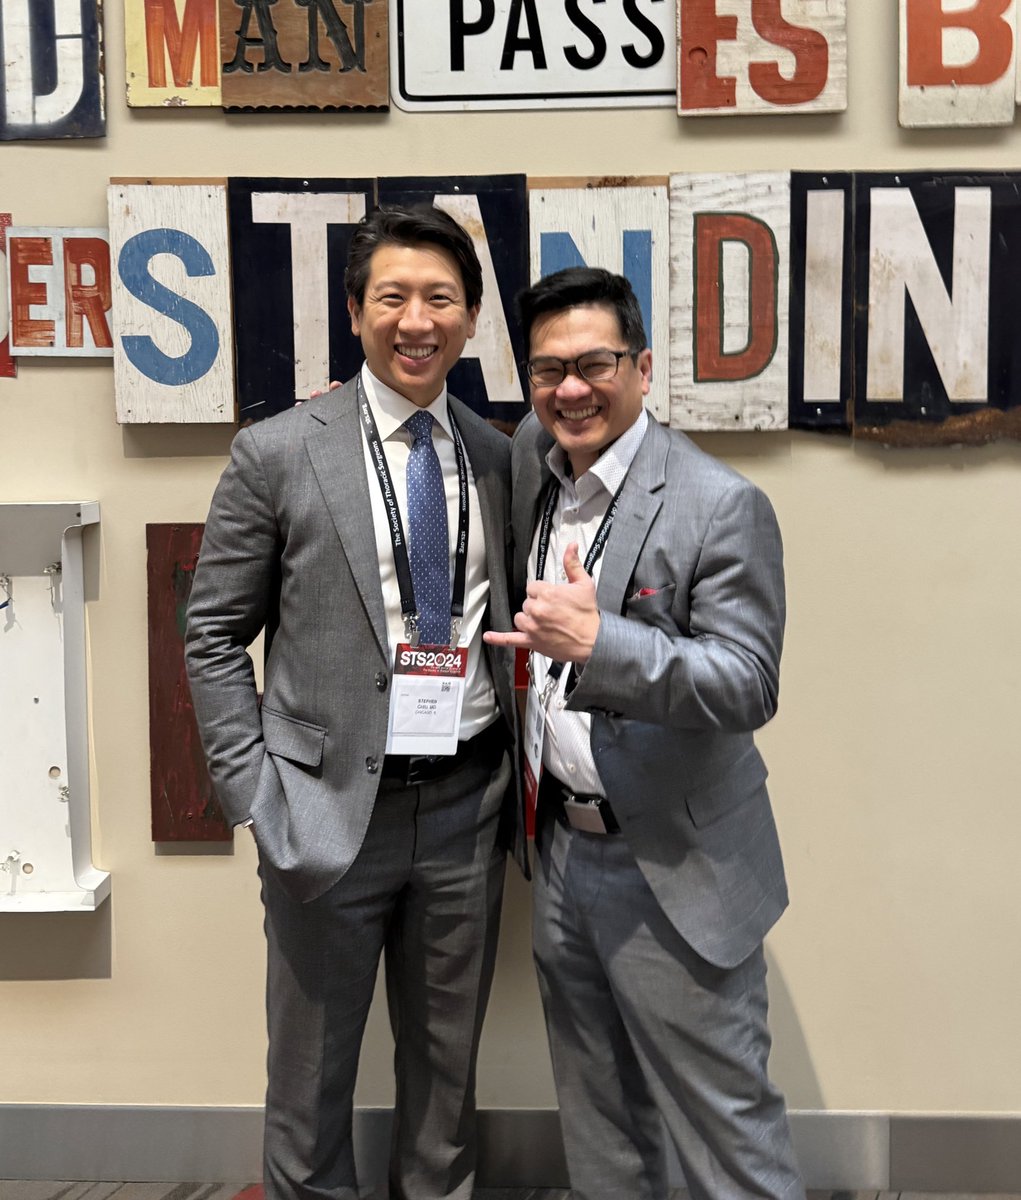 Check it out! Cardiac surgeons Duc Thinh Pham, MD, (@DTPham_CVSurg) and Stephen Chiu, MD, enjoying the @STS_CTSurgery Annual Meeting in San Antonio, Texas.
#STS2024